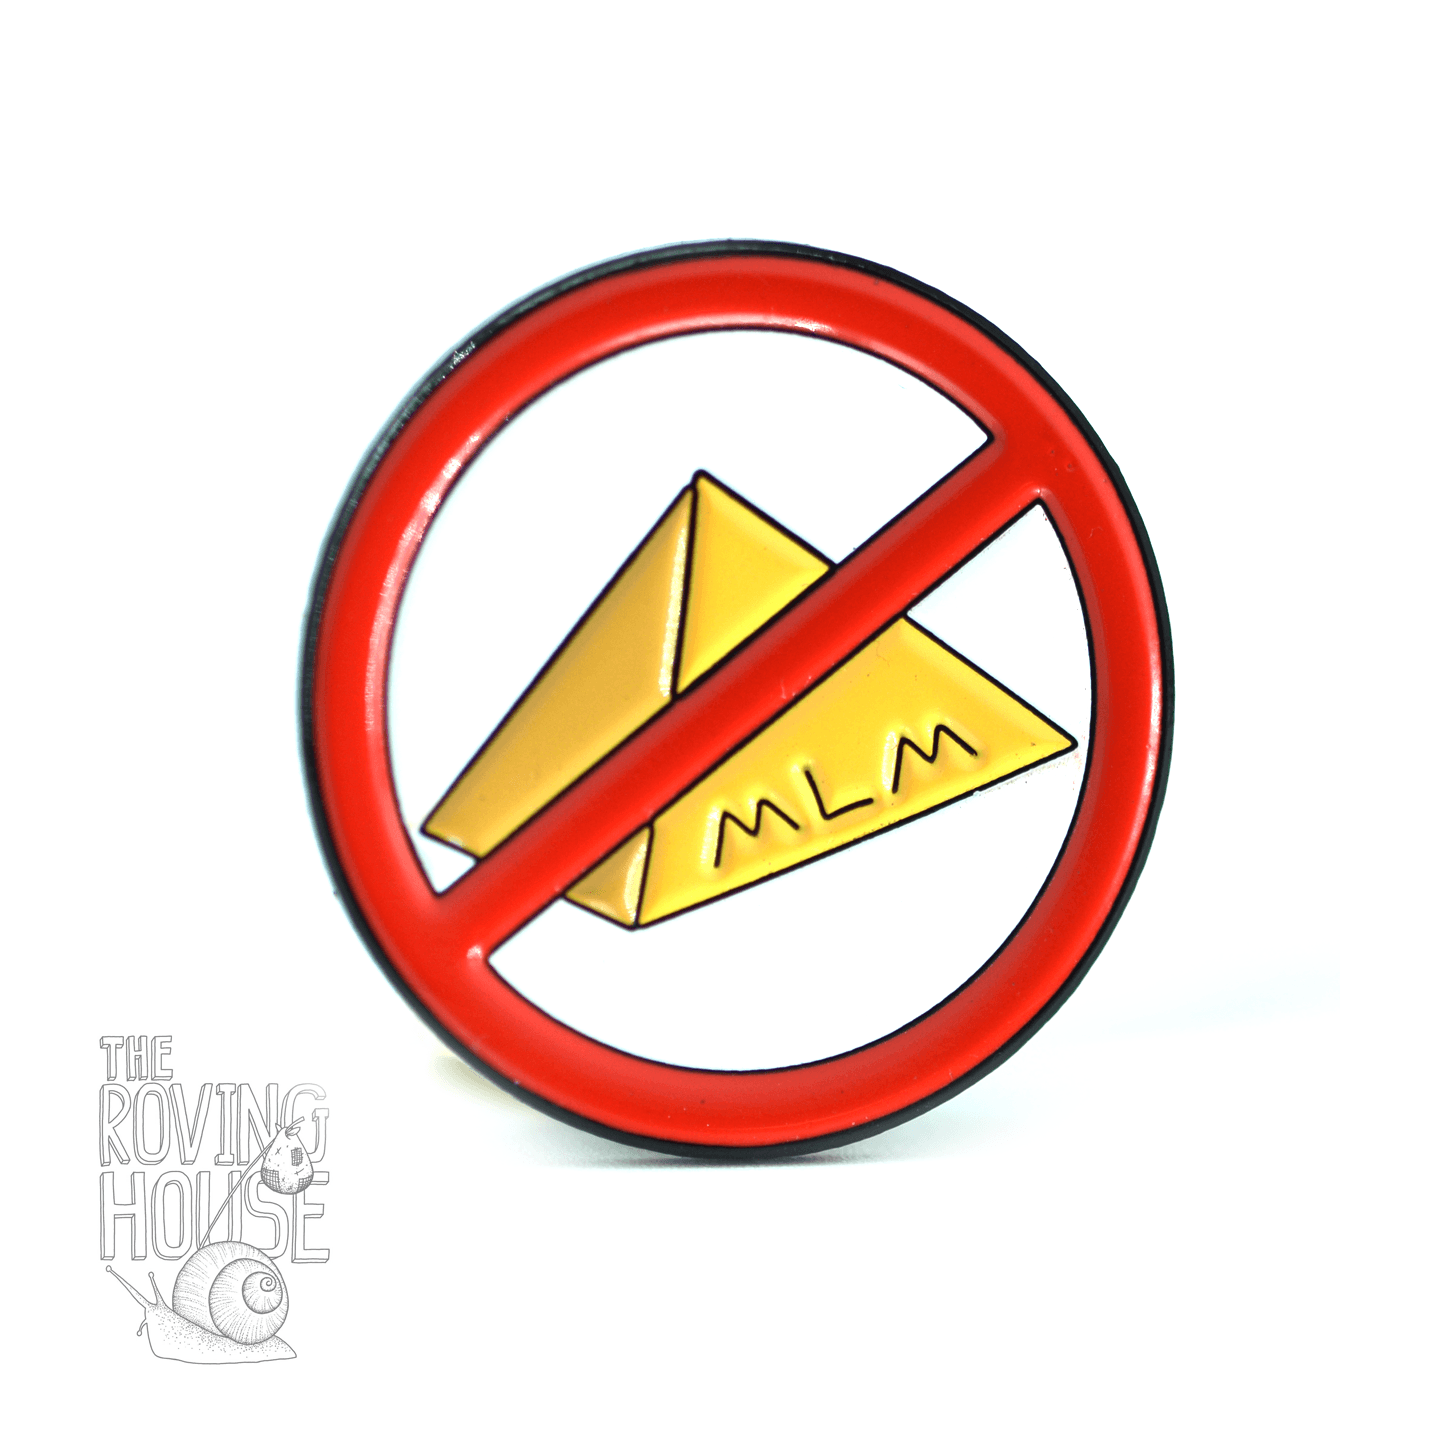 An enamel pin featuring a red circle and slash over a pyramid, which reads "MLM".